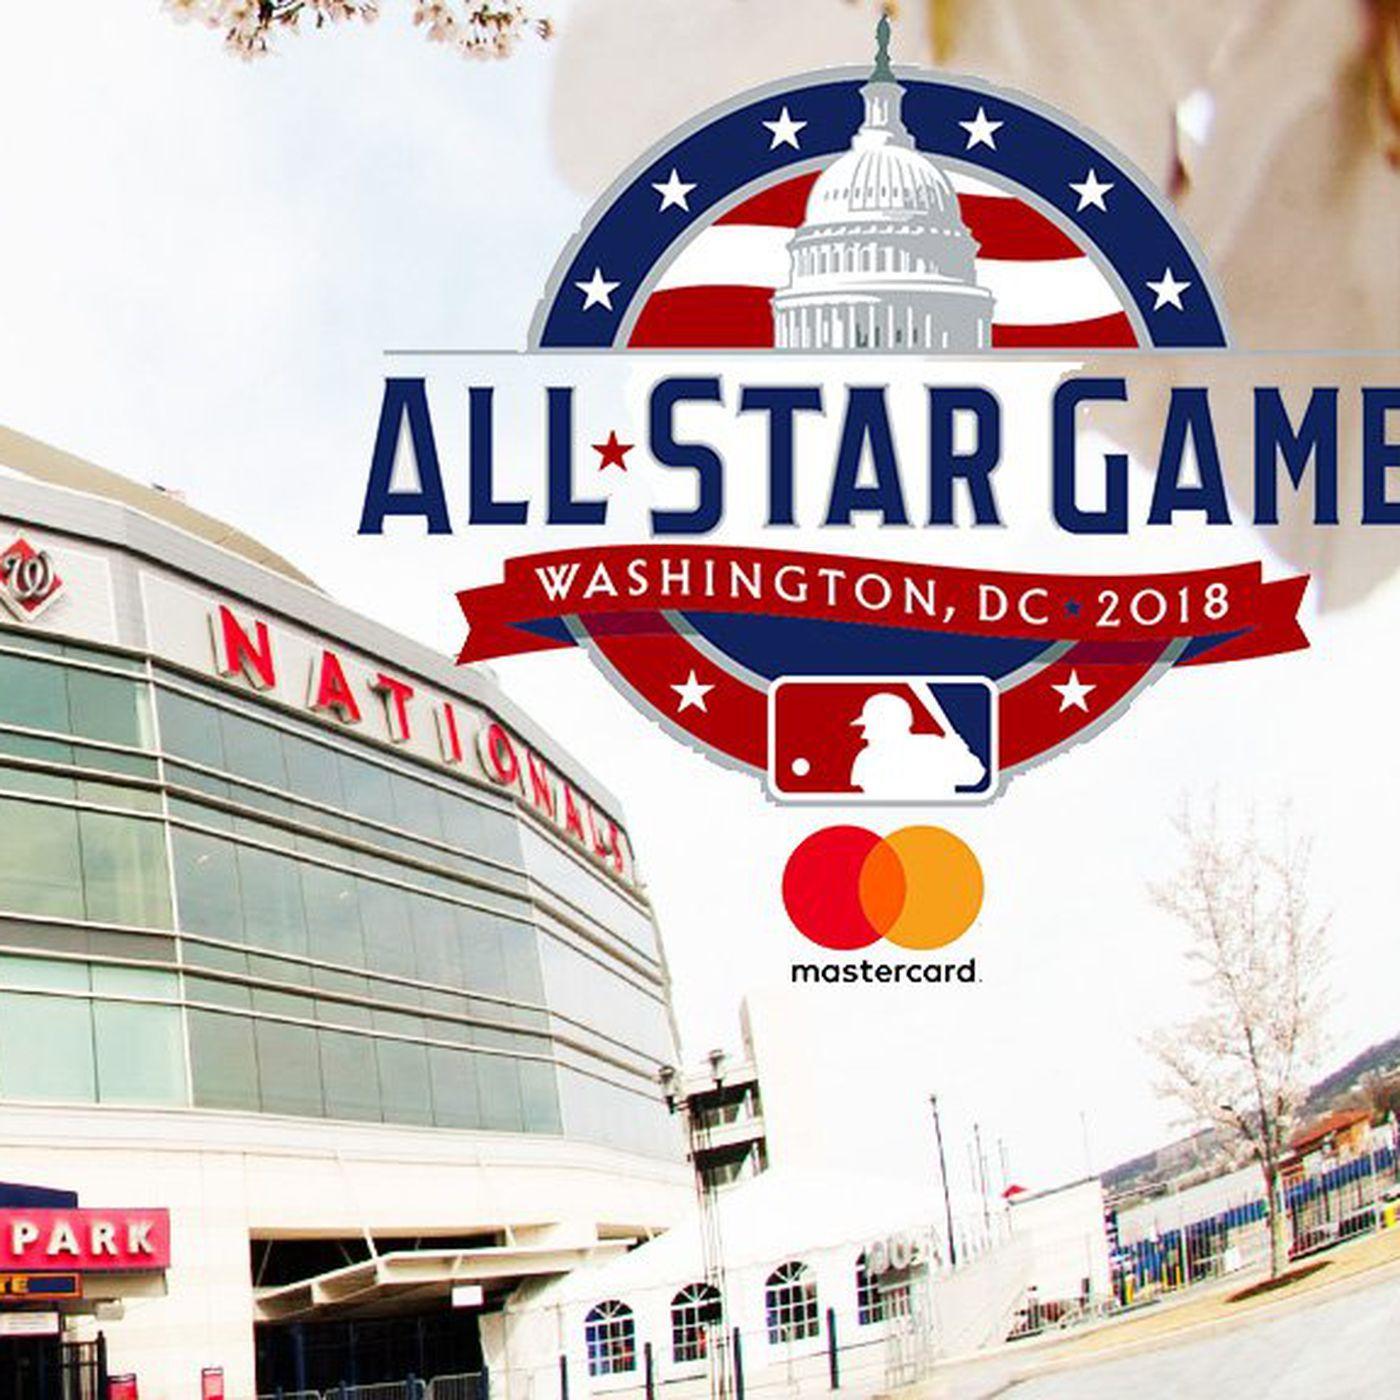 Red White Blue Game Logo - Here's your first look at the 2018 MLB All-Star Game logo - SBNation.com